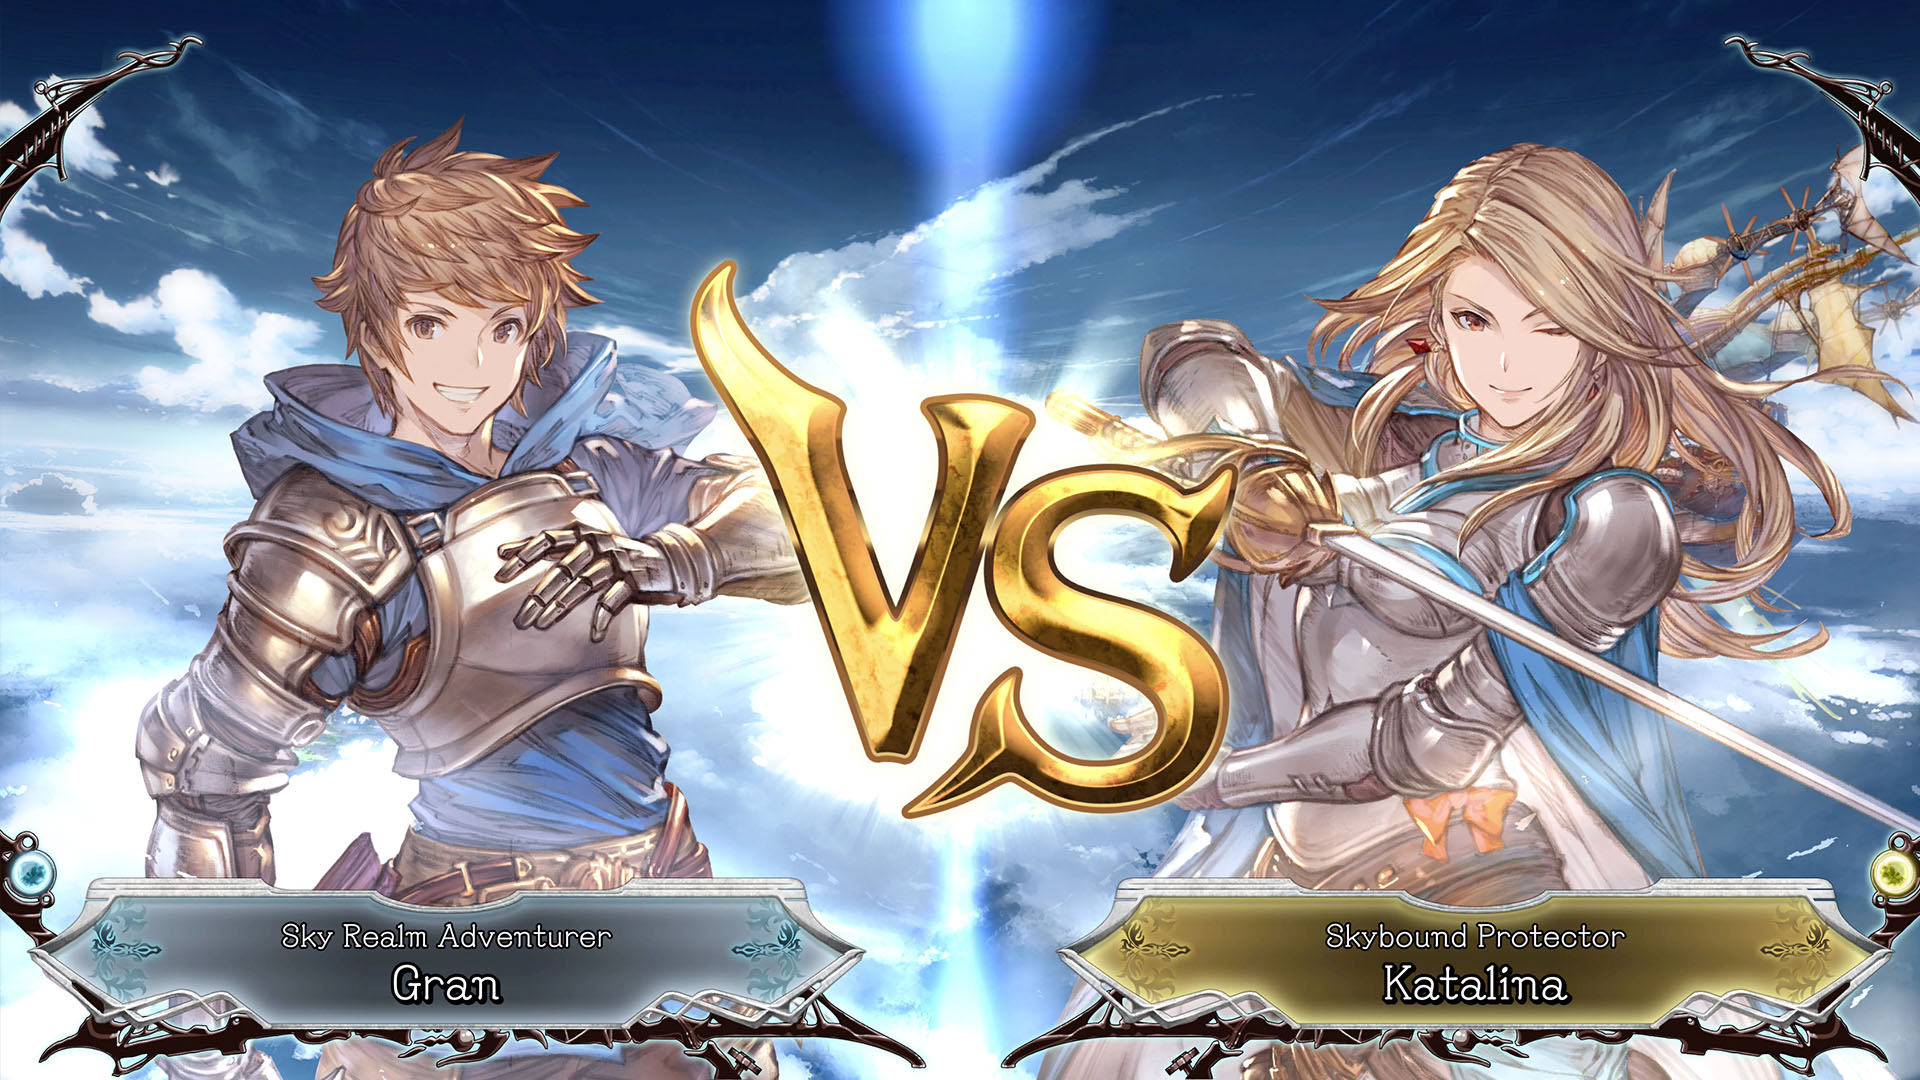 Granblue Fantasy: Versus E3 2019 Hands-on Preview Gameplay